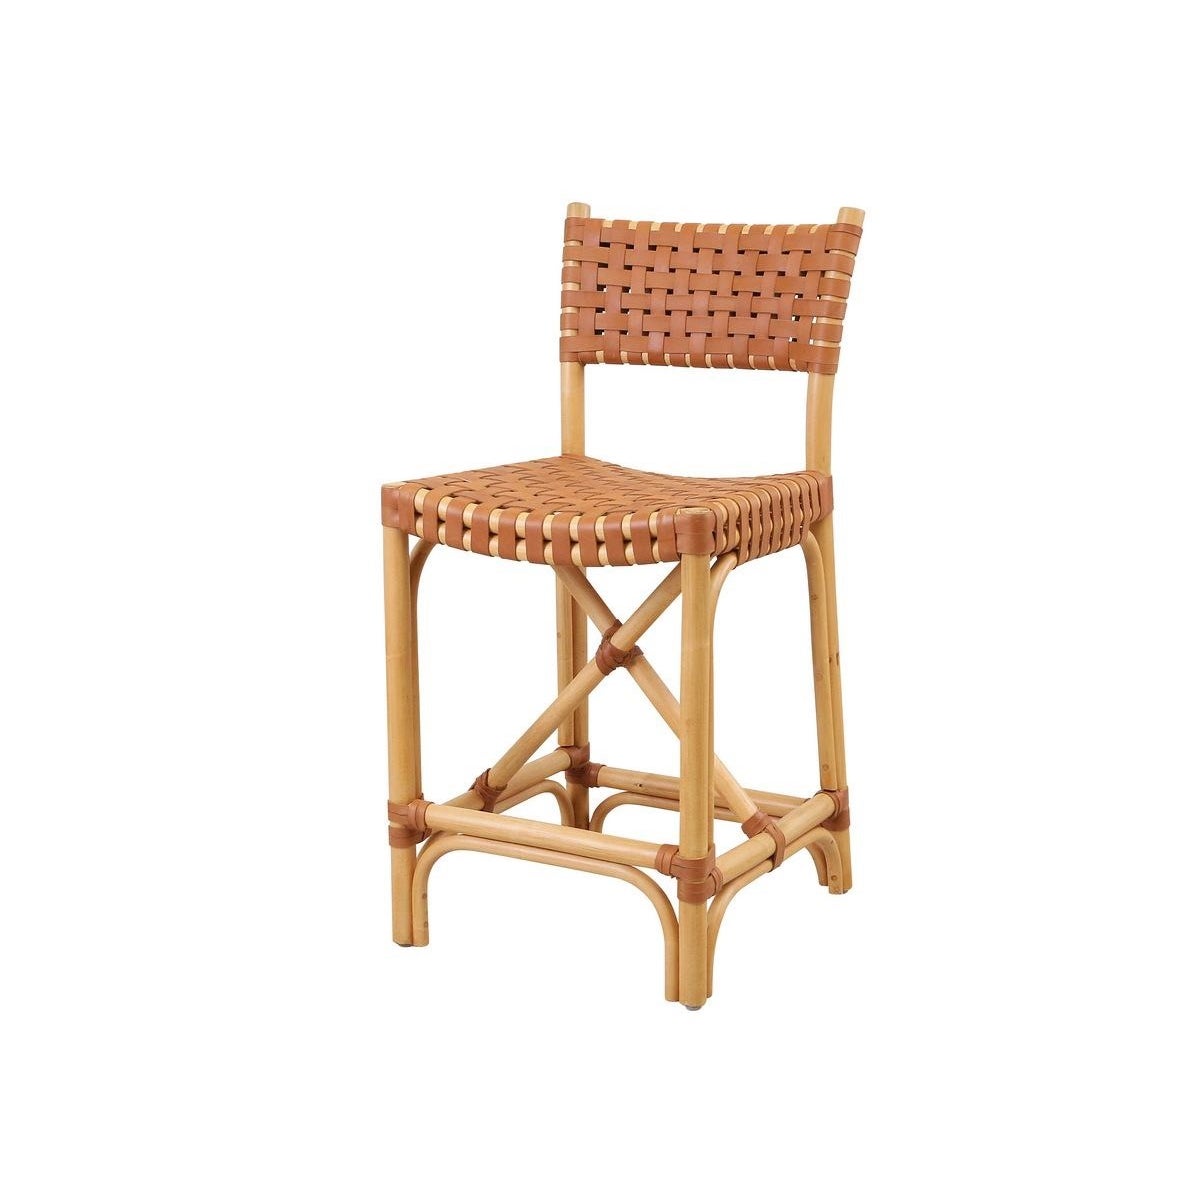 Malibu Counter Chair Frame Color - Natural Leather Color - Brown This Item Will be Discontinued.